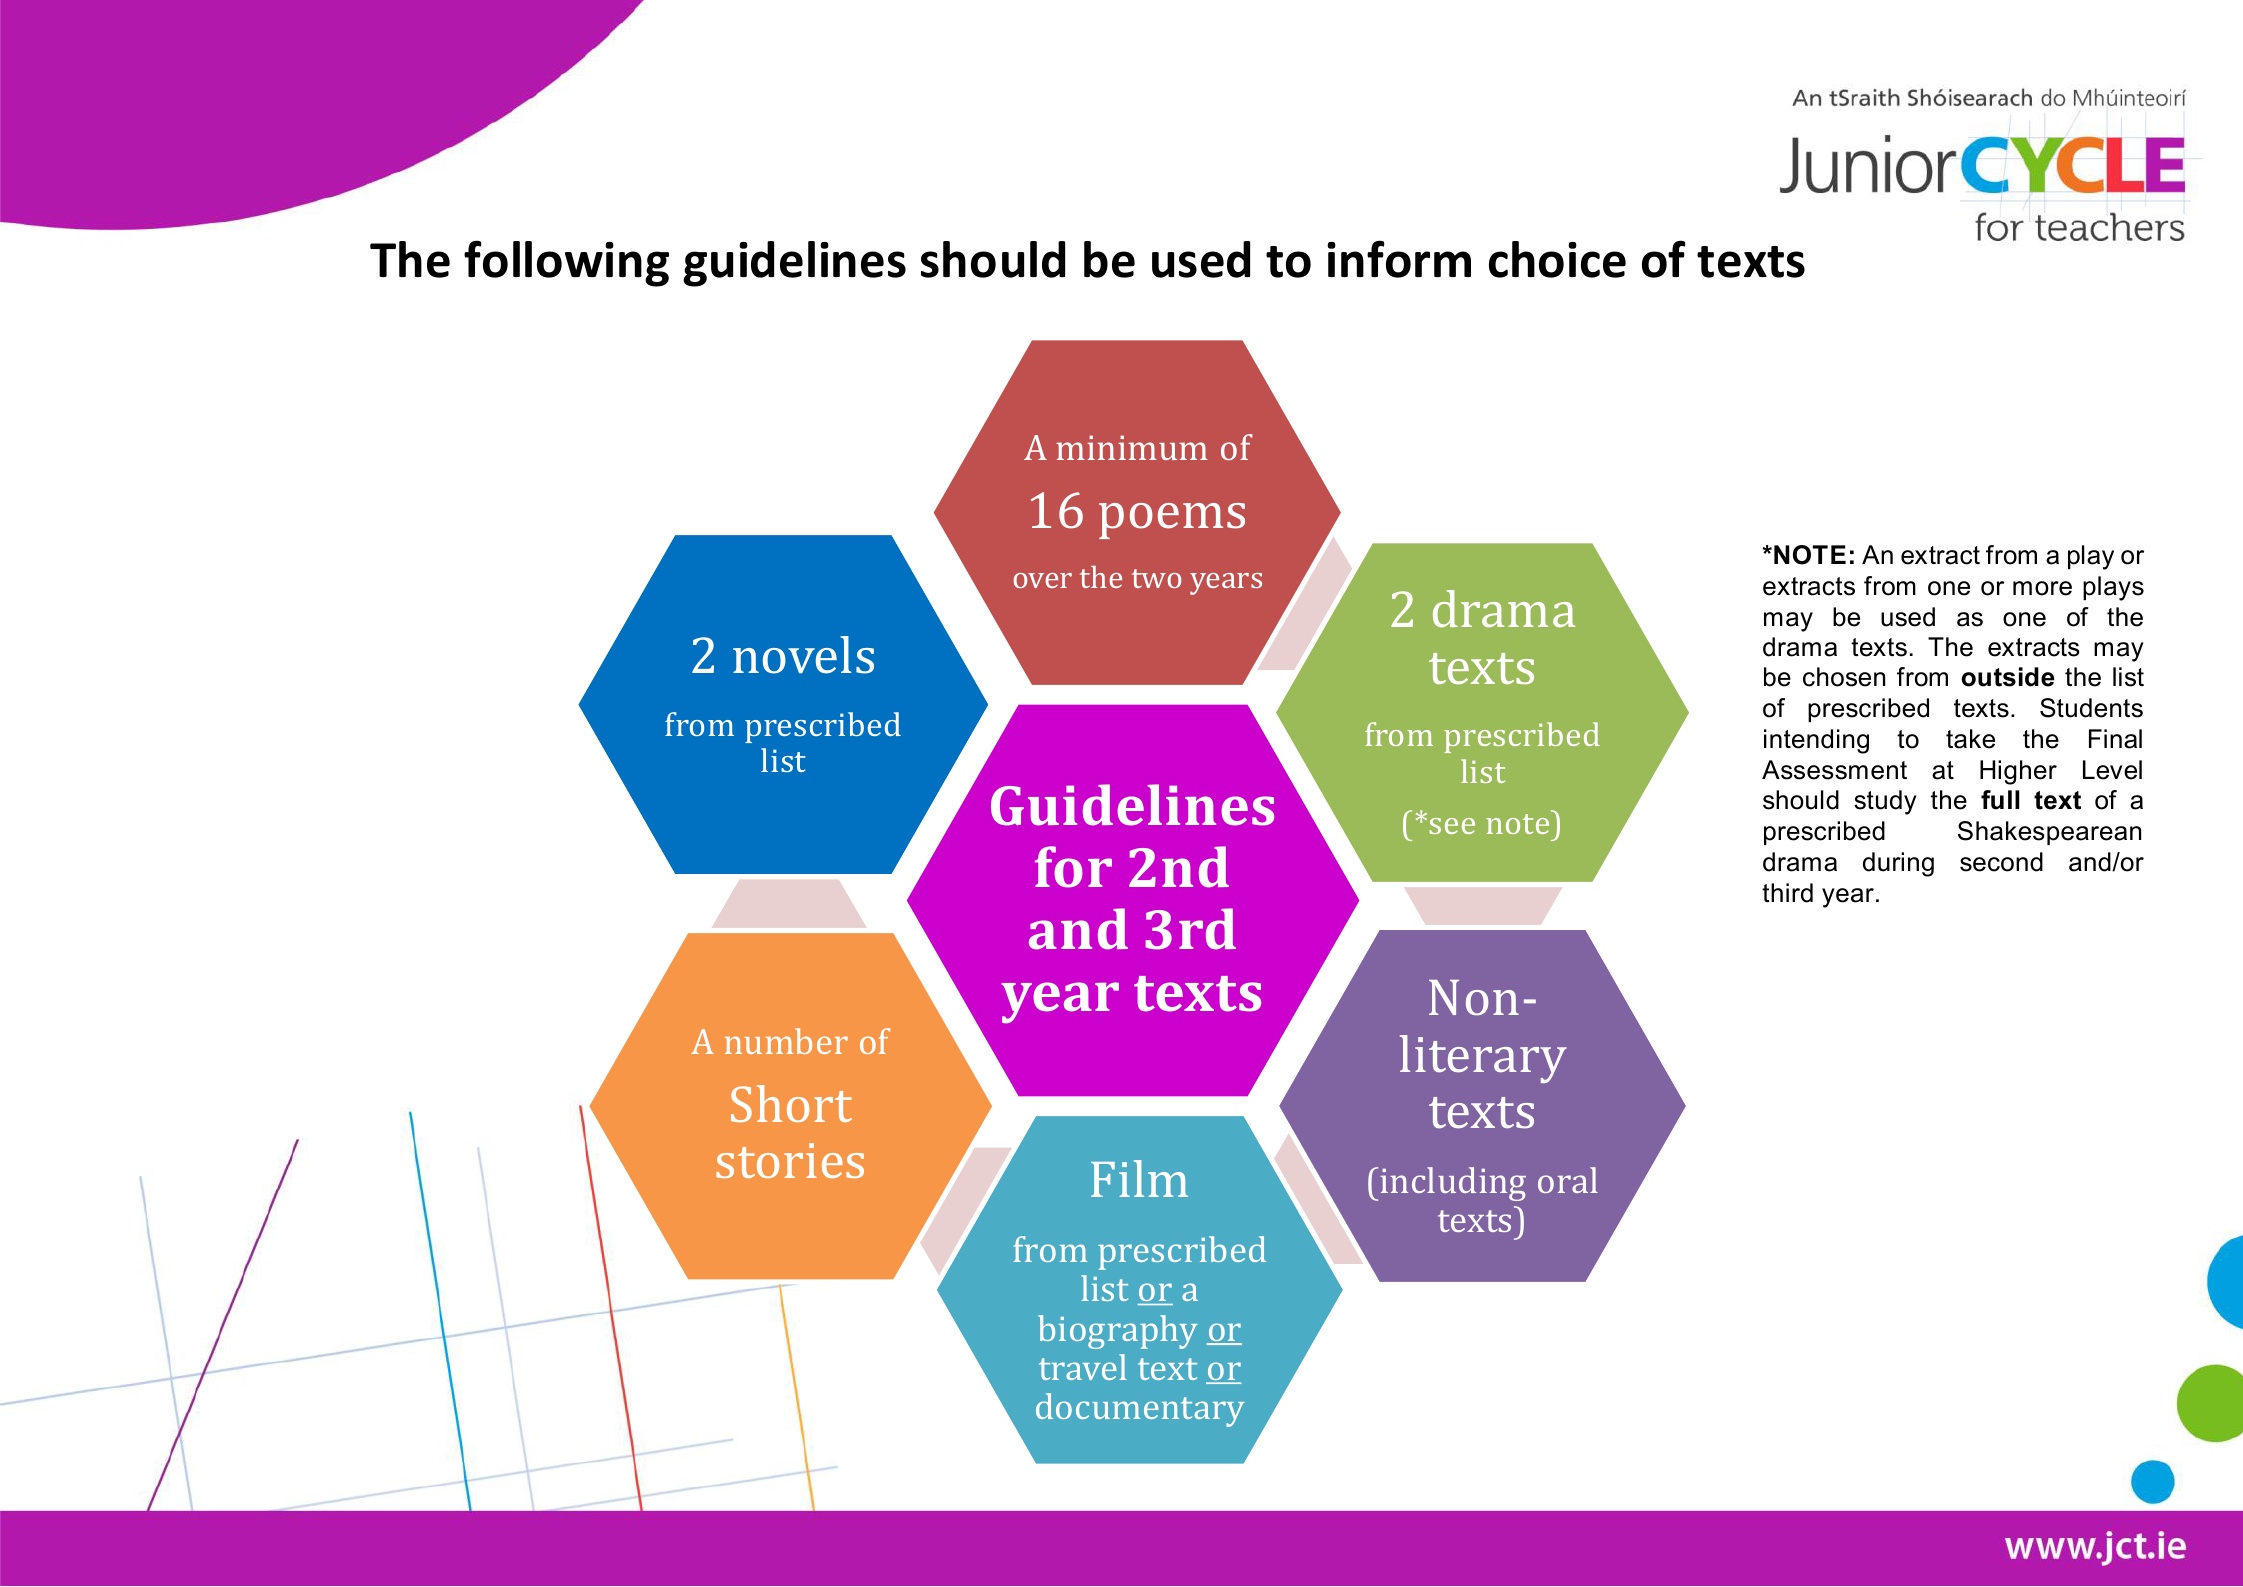 Guidelines to inform choice of texts